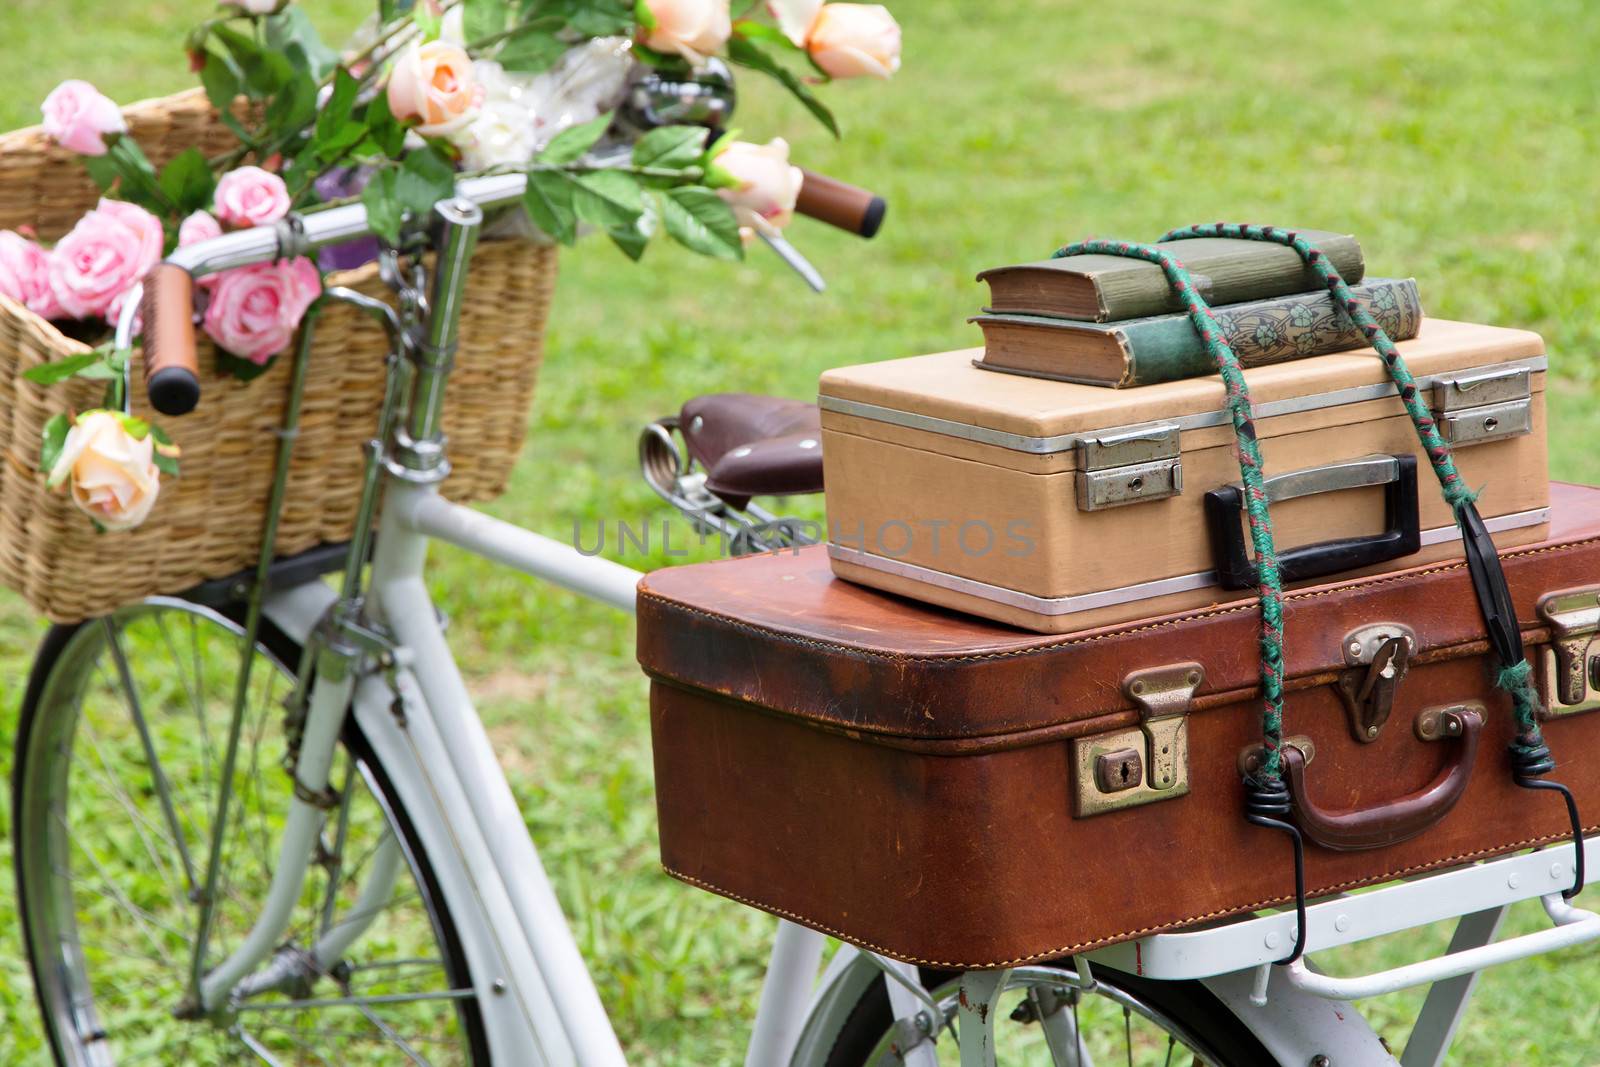 Vintage bicycle on the field with a basket of flowers and bag